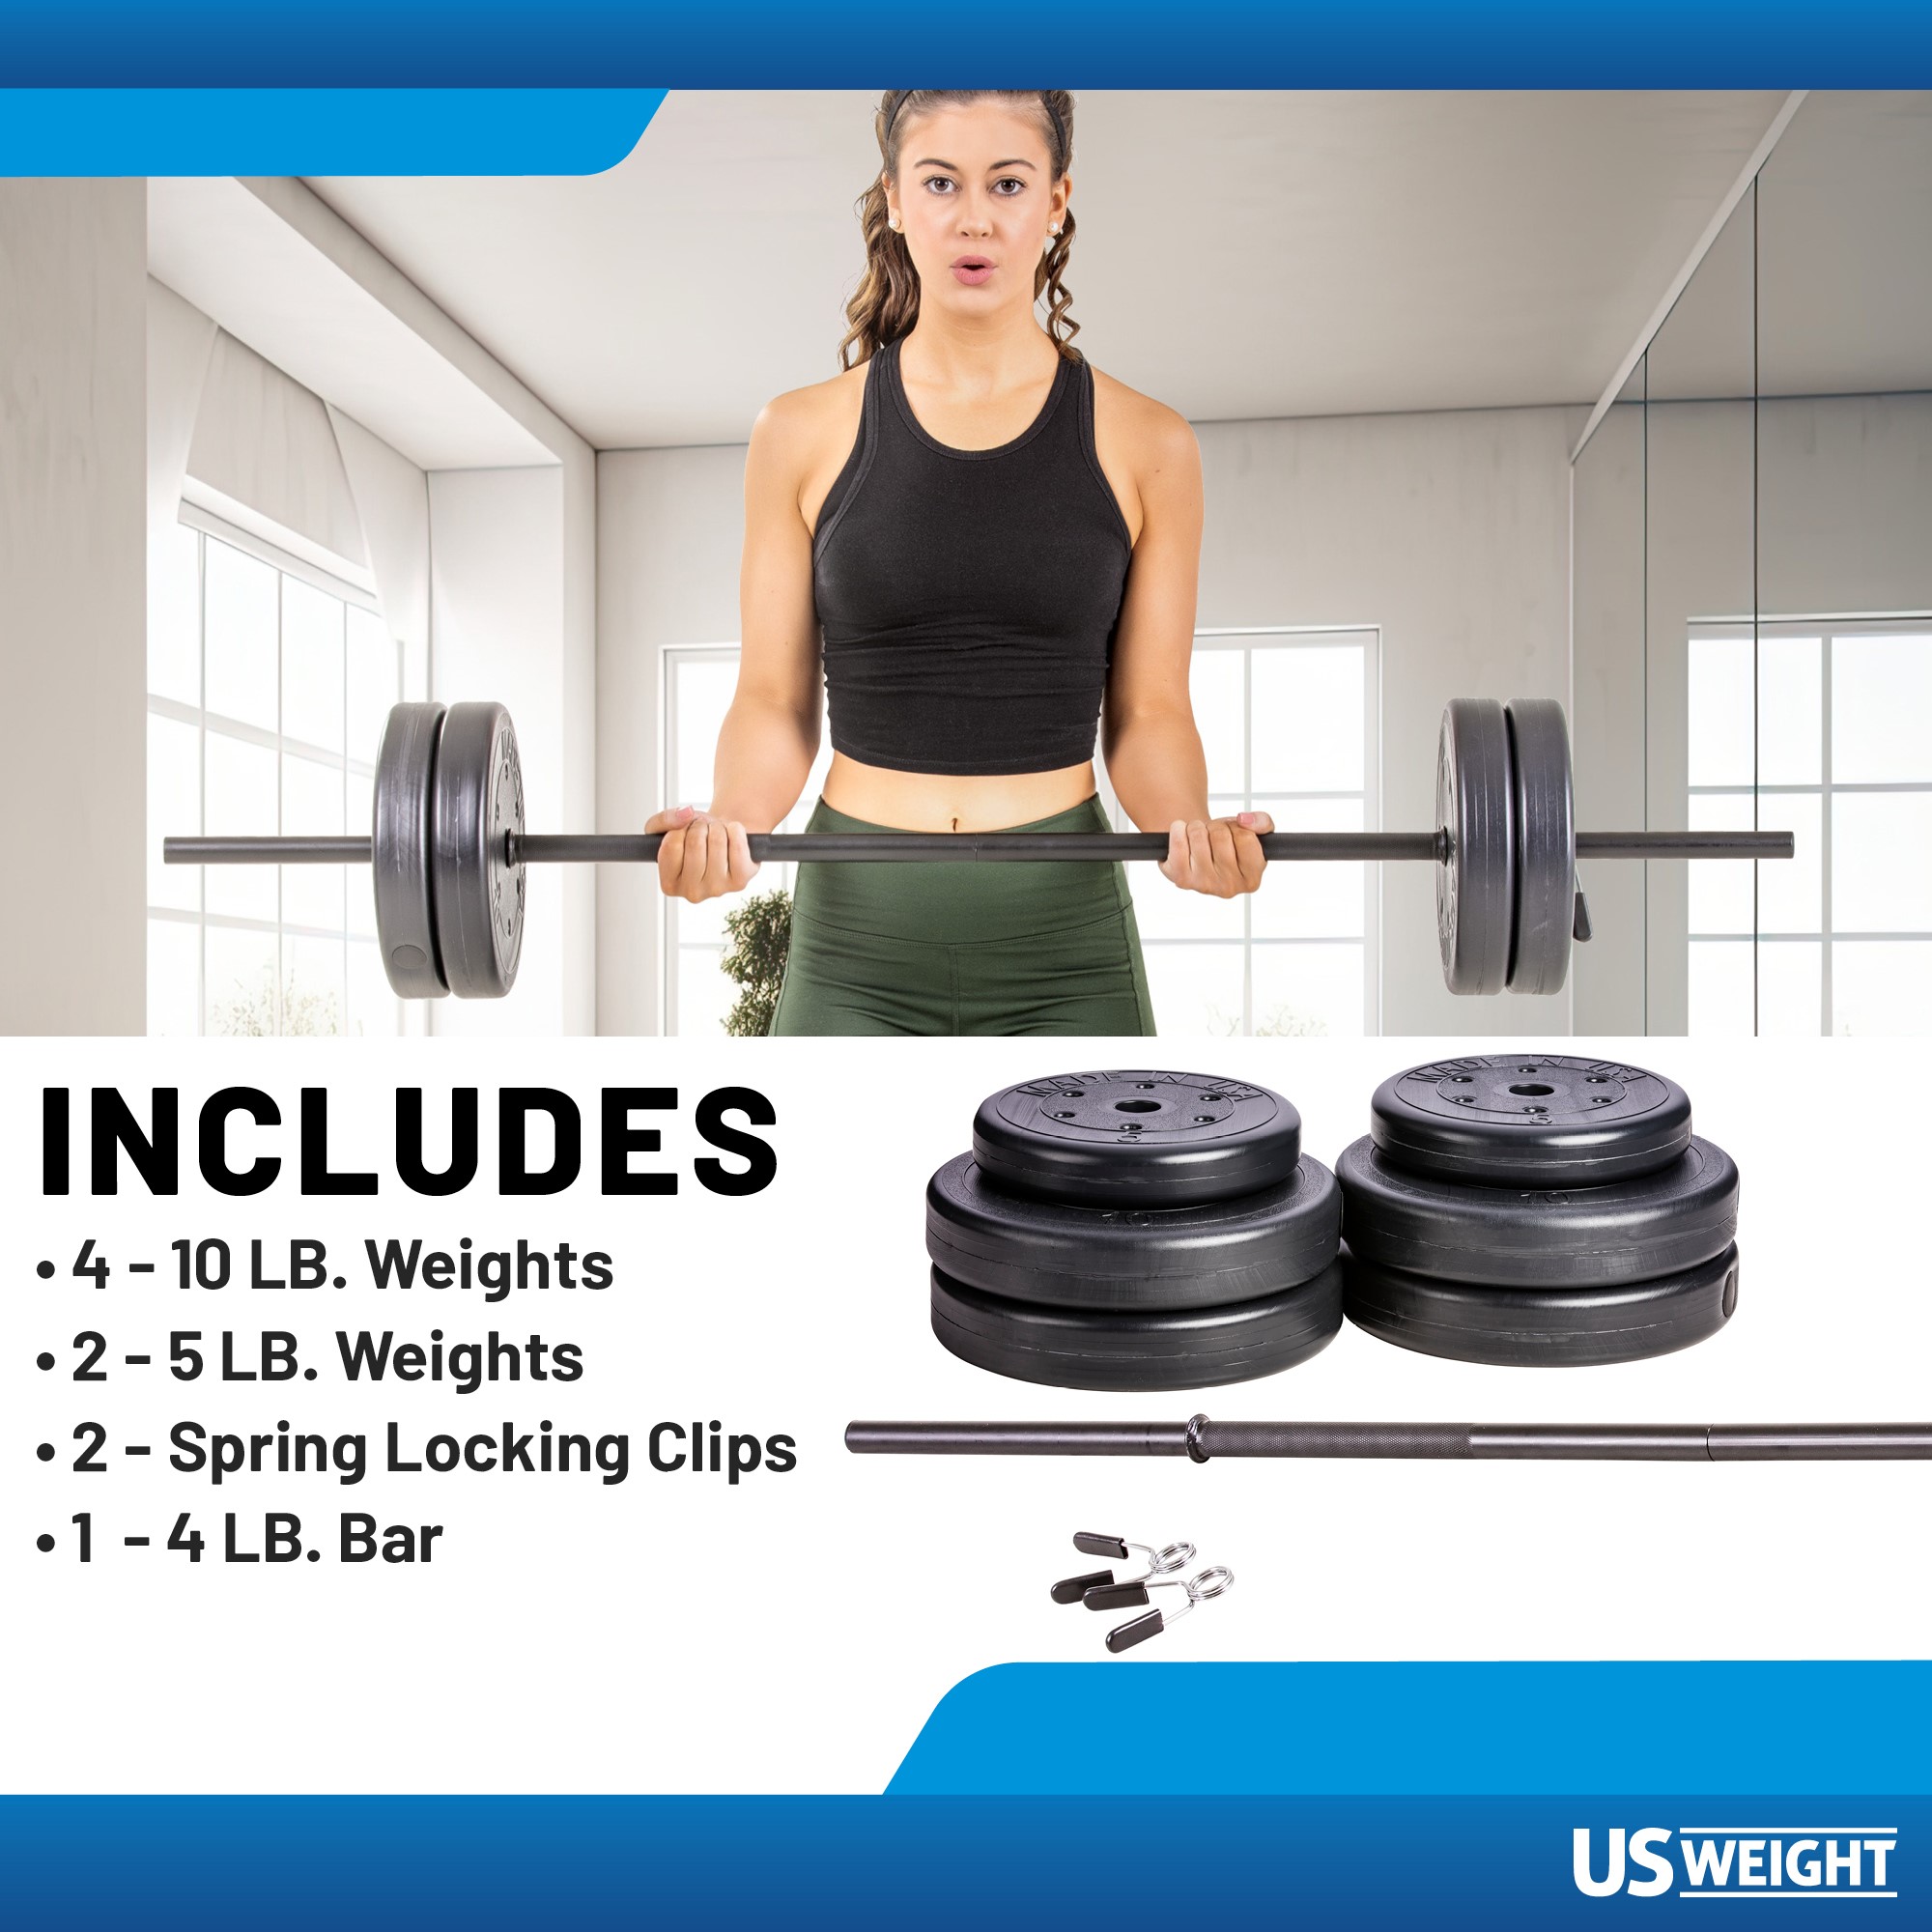 US Weight 55 lb. Barbell Weight Set with 3-Piece Threaded Barbell Bar, Two Locking Spring Clips - image 3 of 6